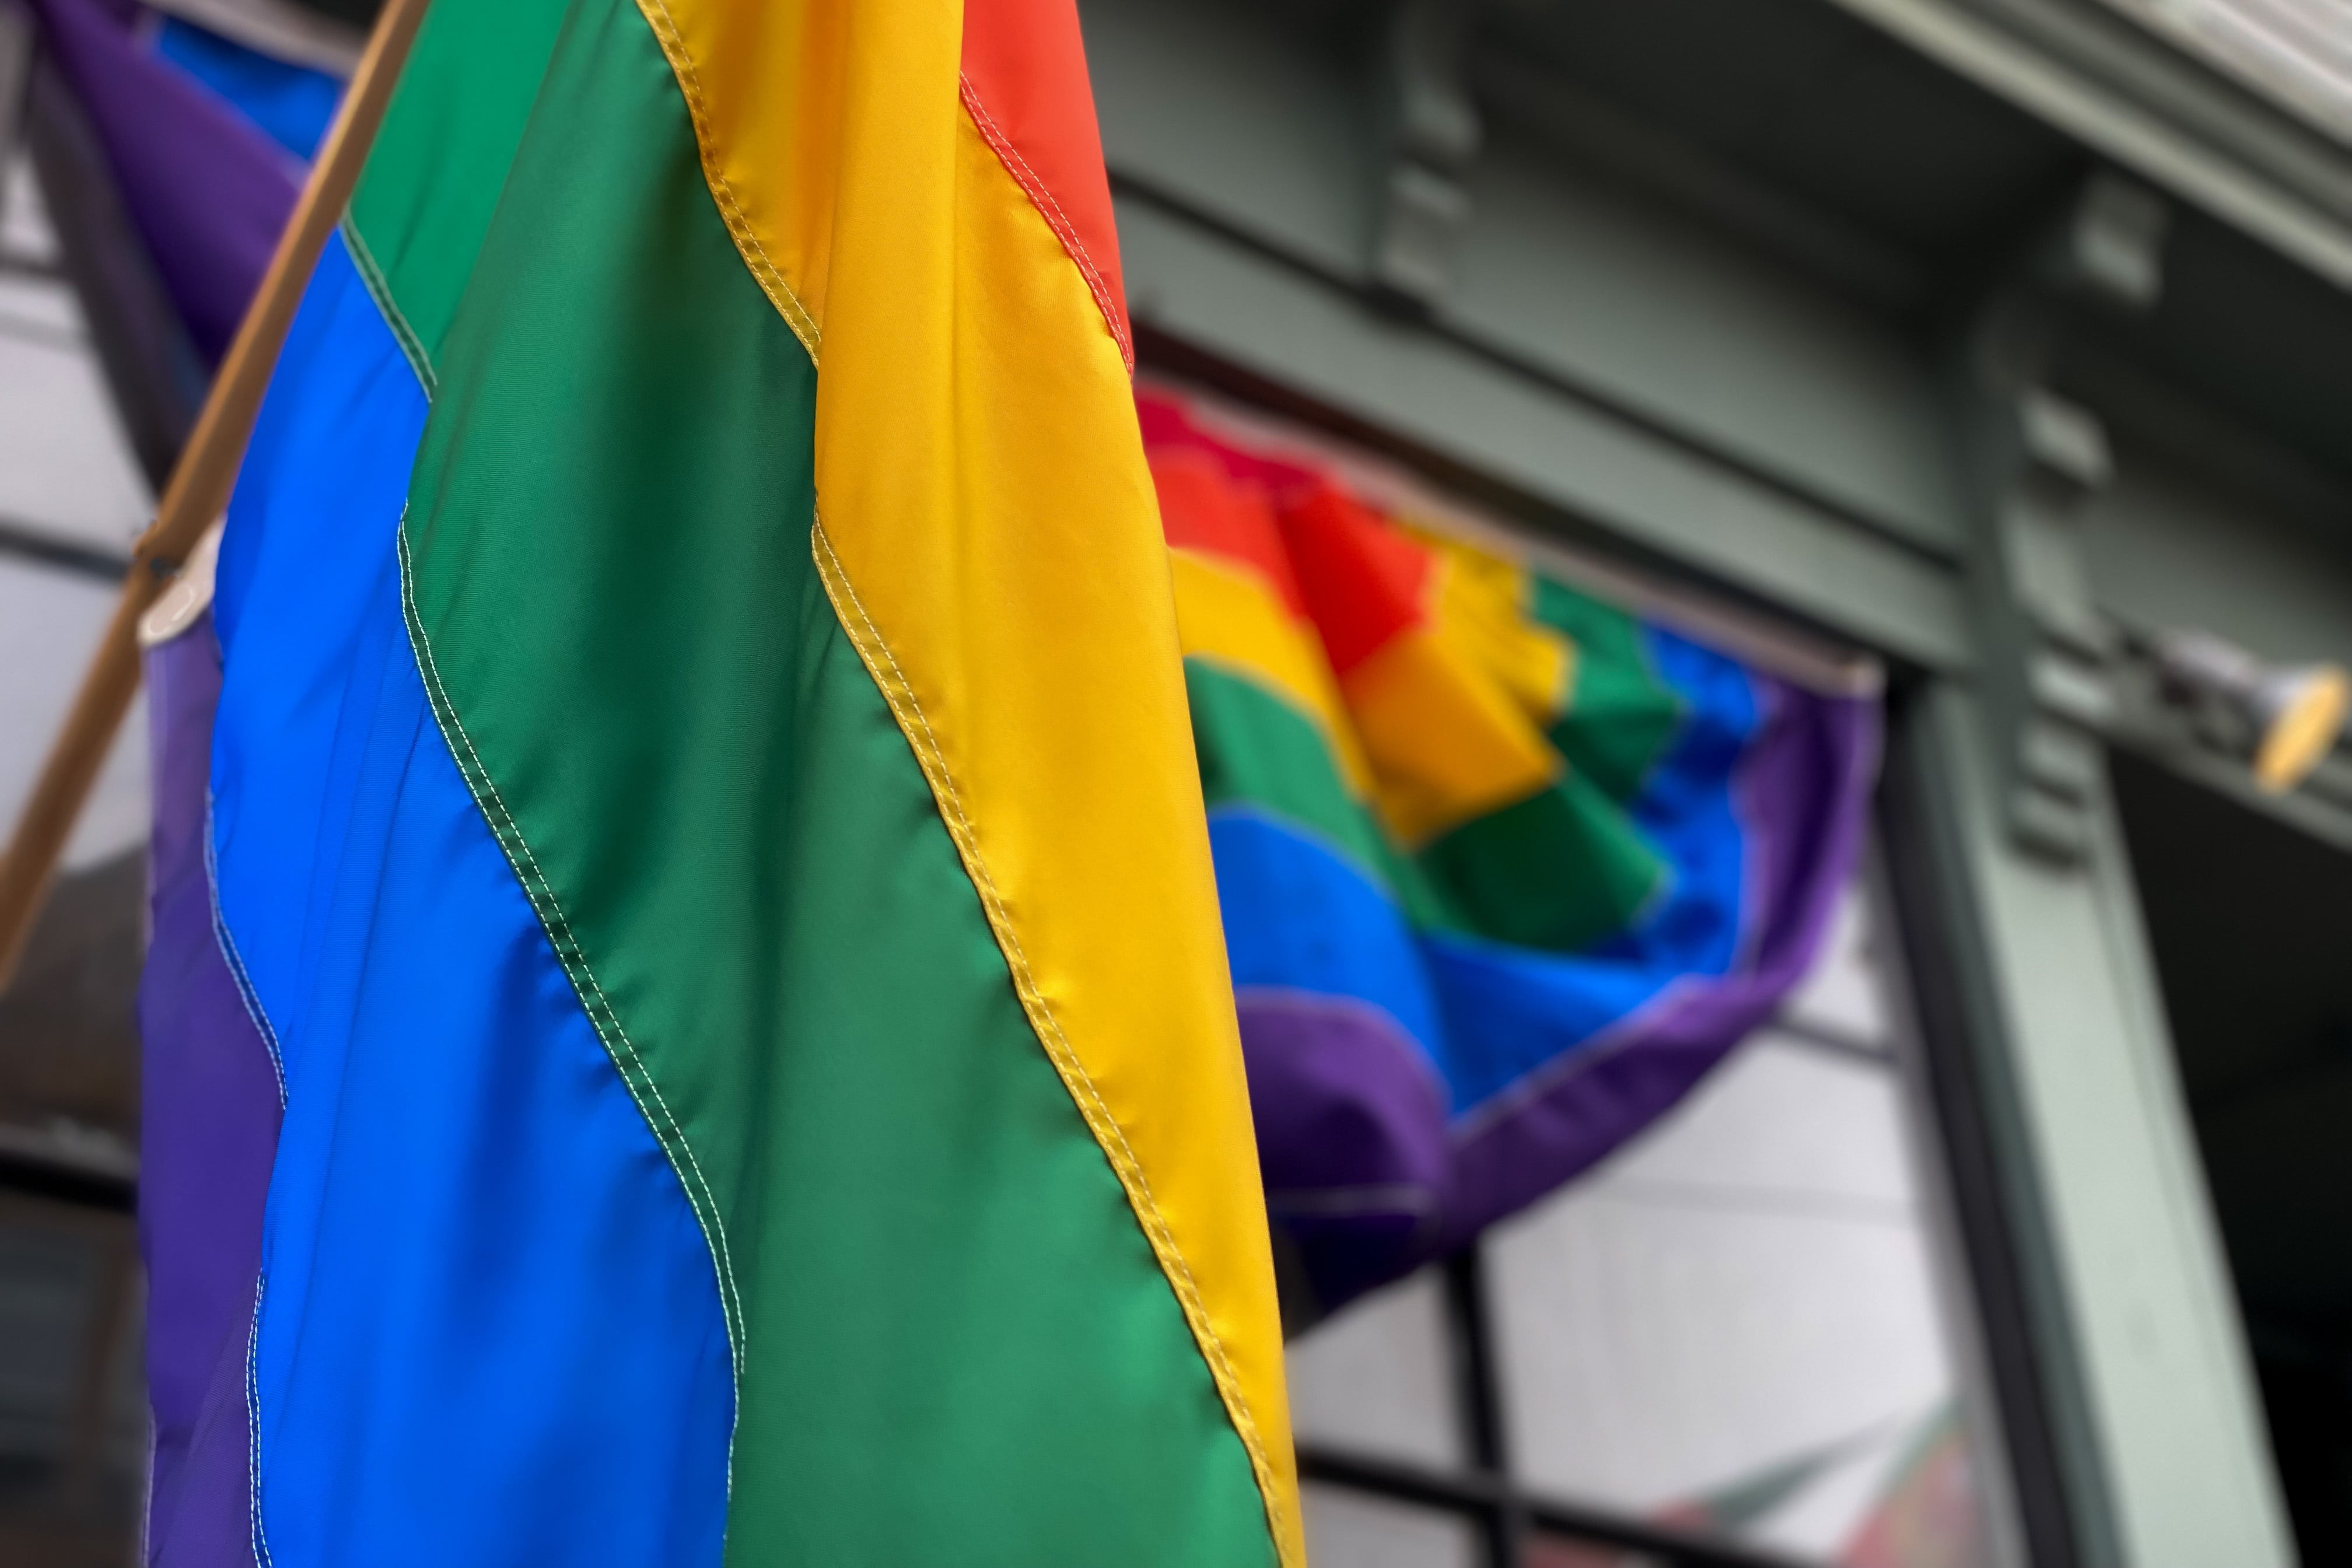 A Pride Flag hangs from a building, with a Pride banner on the window behind it.